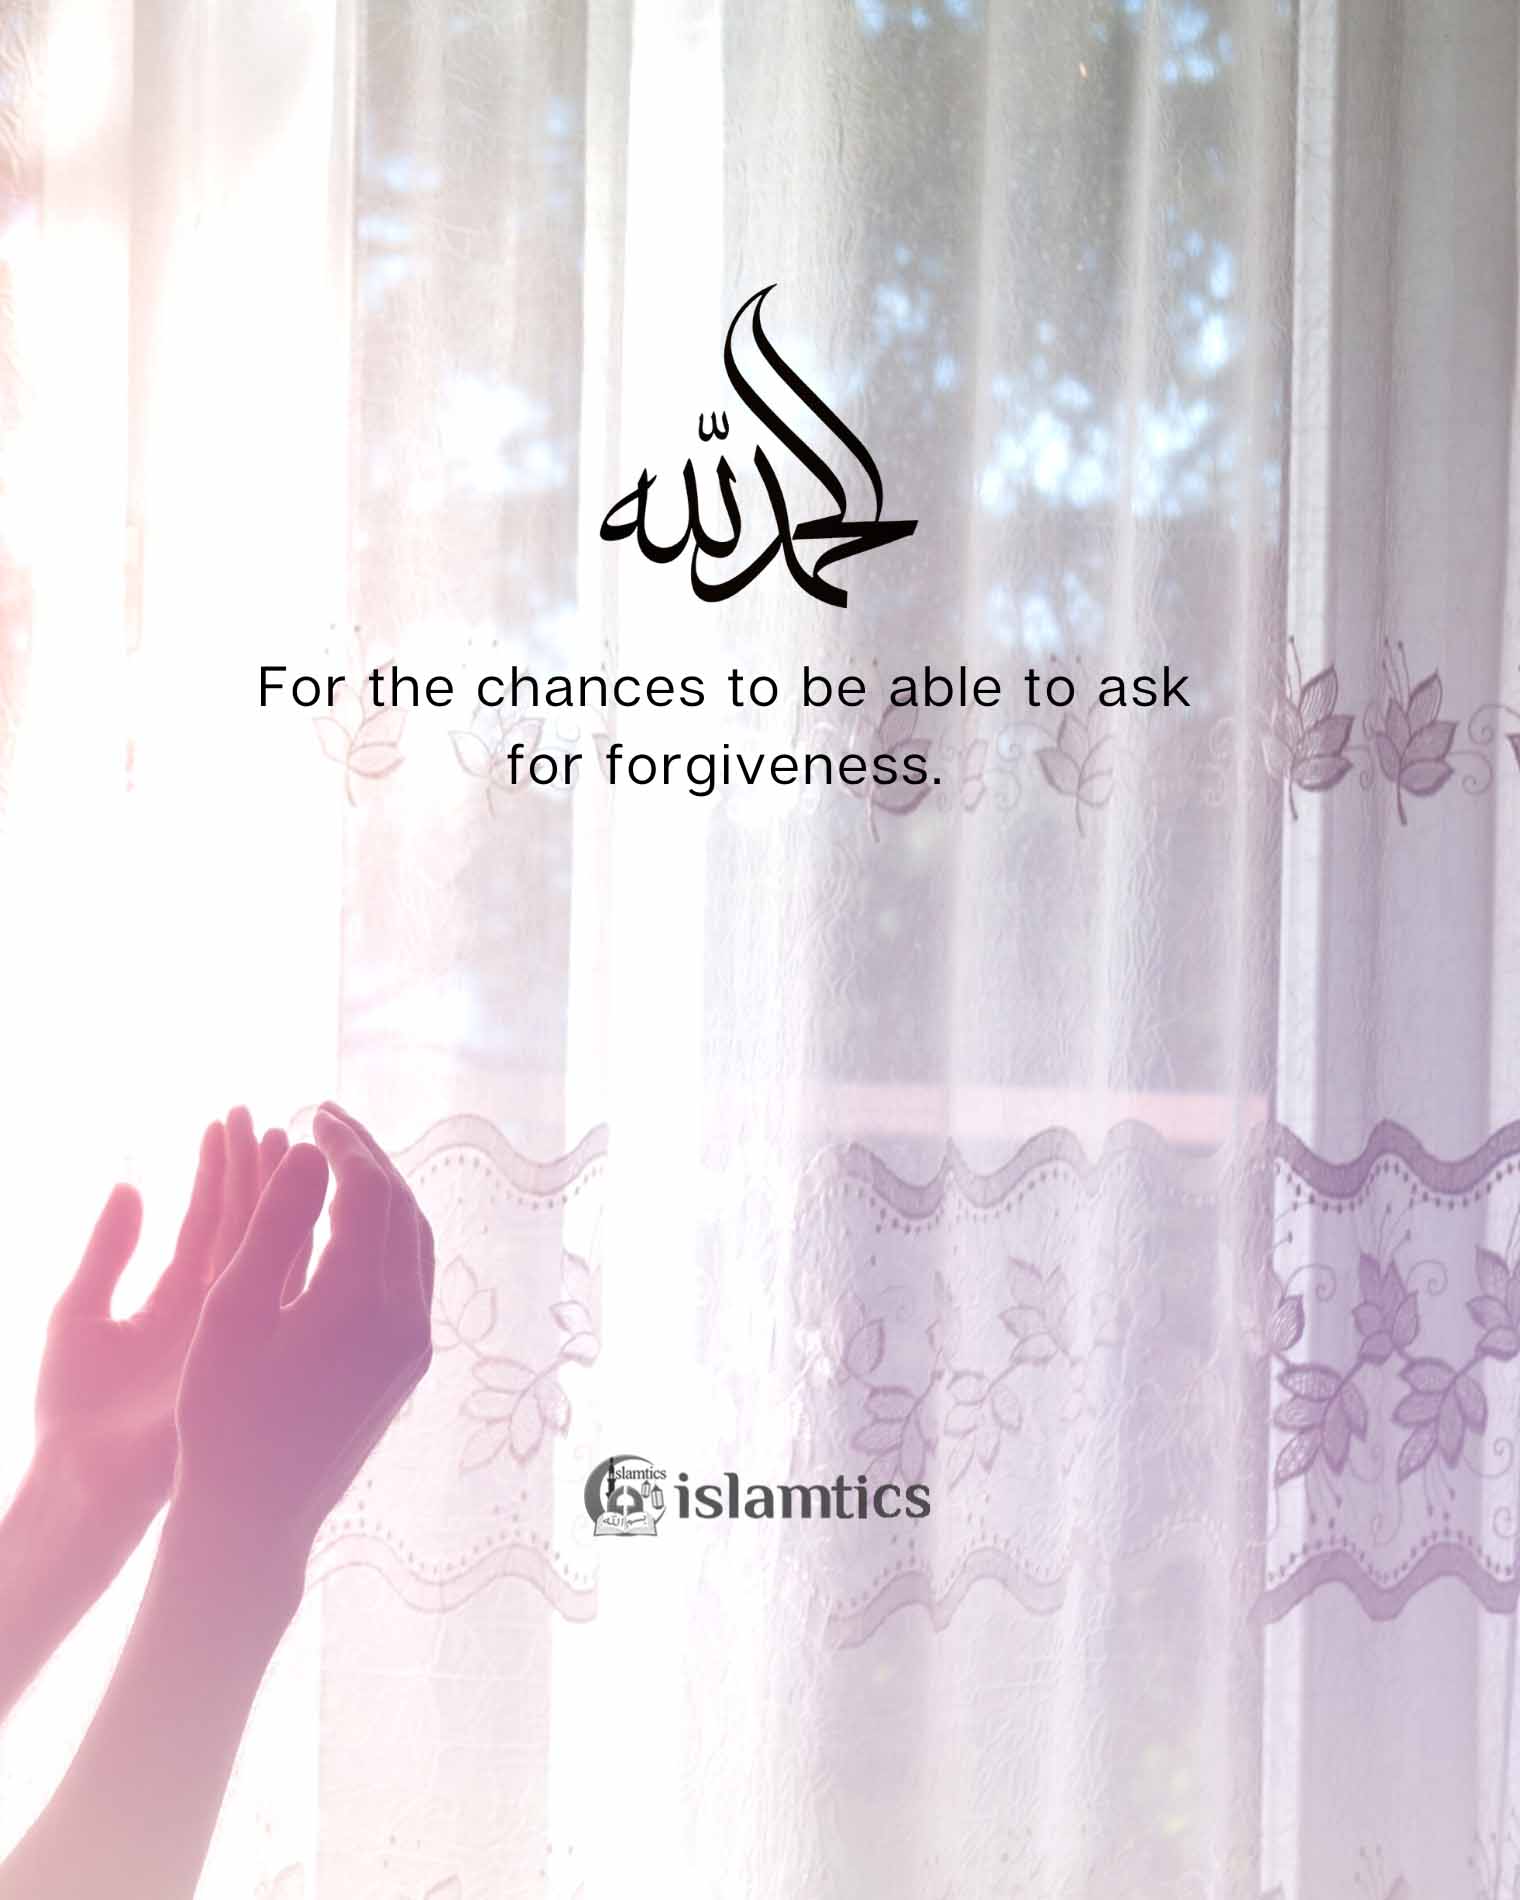  Alhamdulillah for the chances to be able to ask for forgiveness.